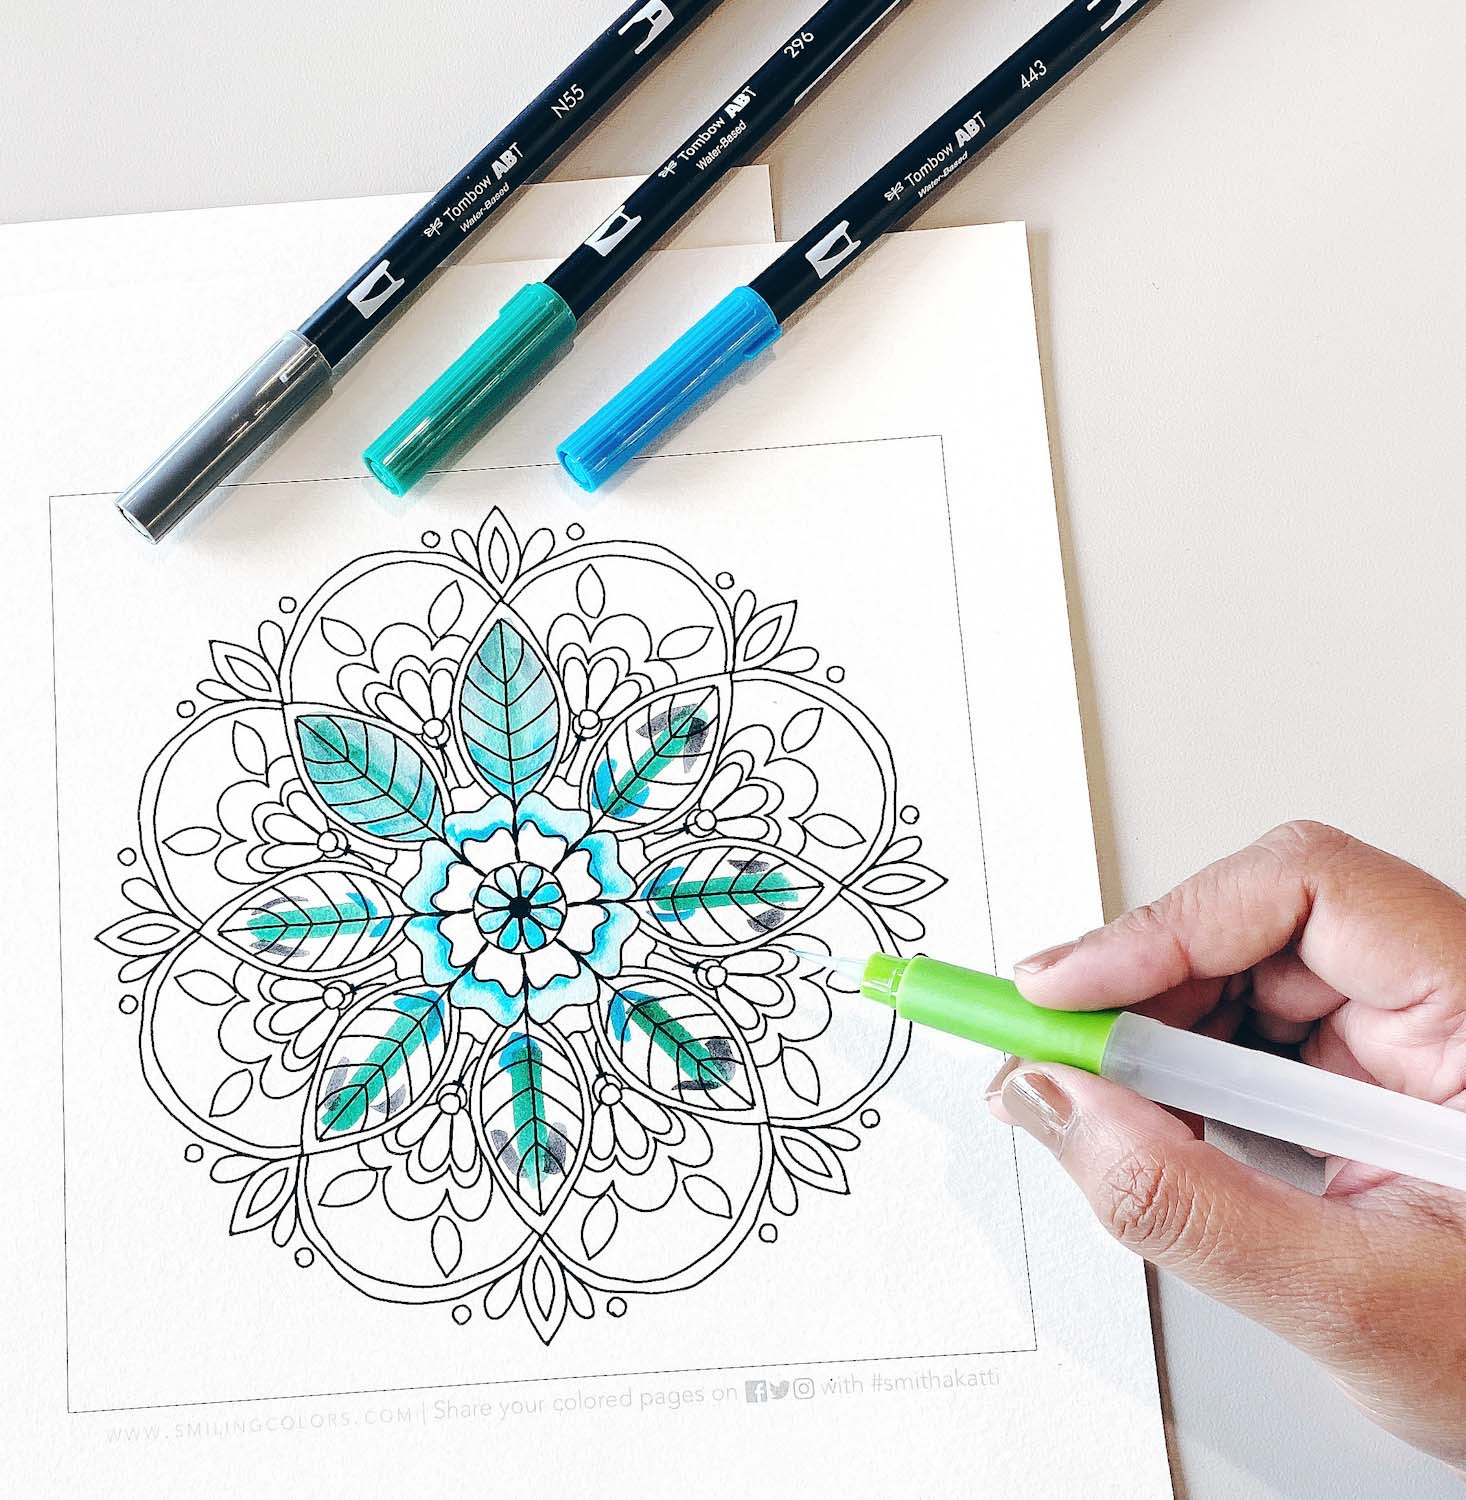 How to Watercolor with Tombow Brush Pens and Rubber Stamps - Tombow USA Blog